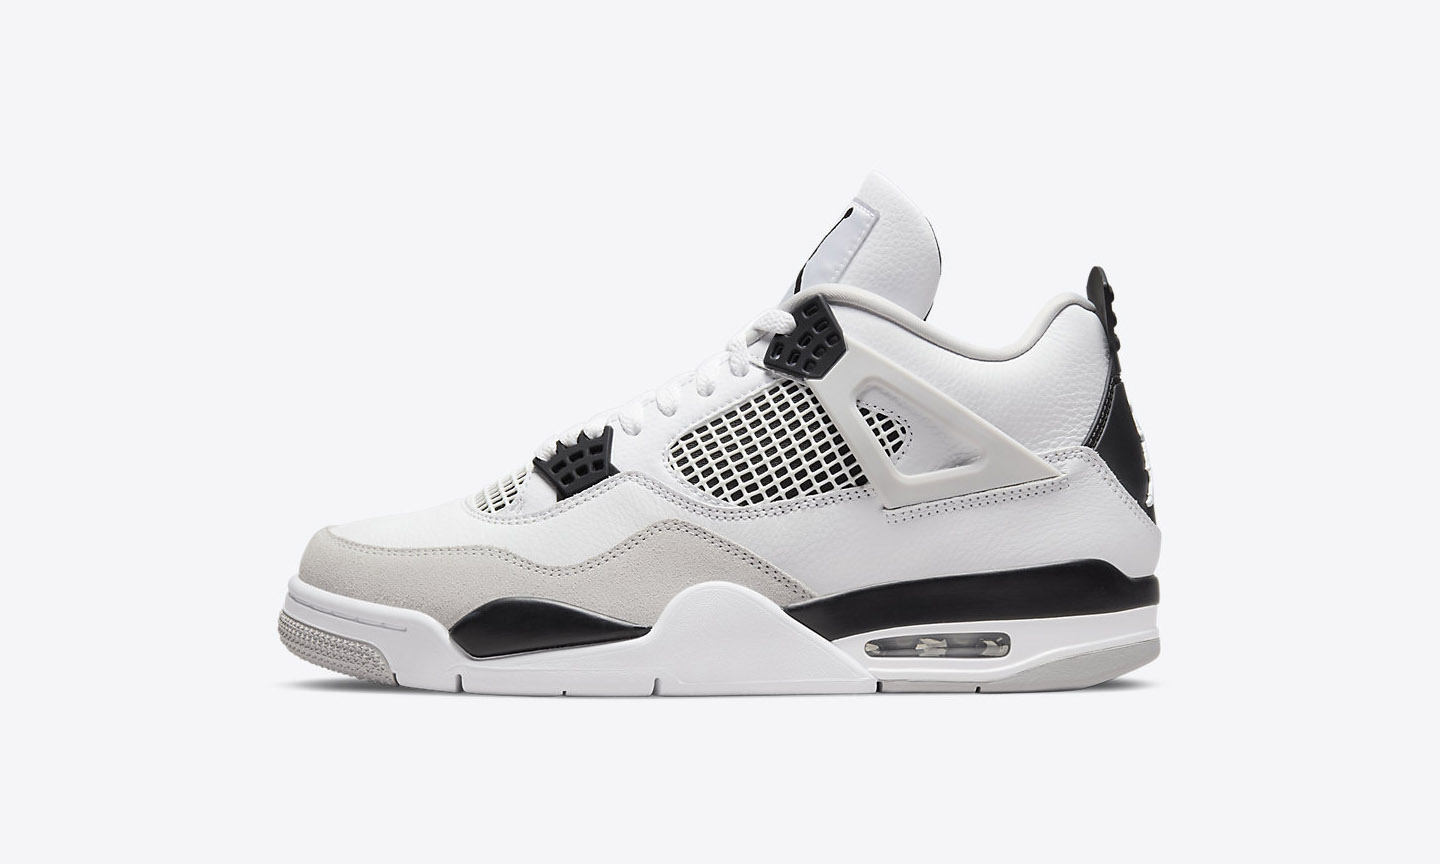 jordan 4 that just came out